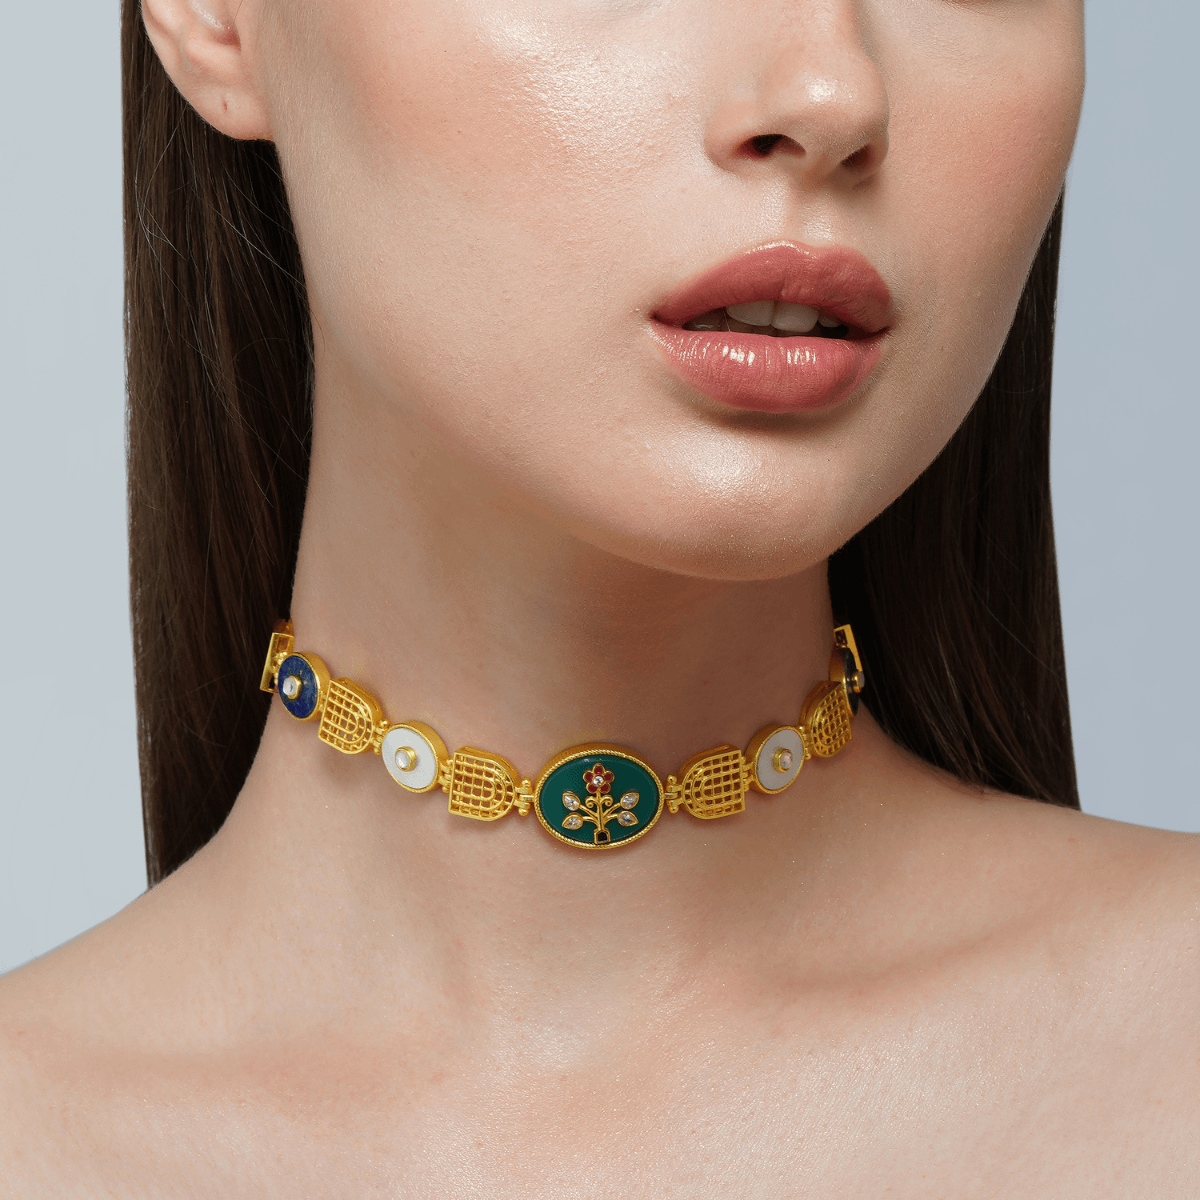 Buy Glory of Tradition Choker Necklace Online in India